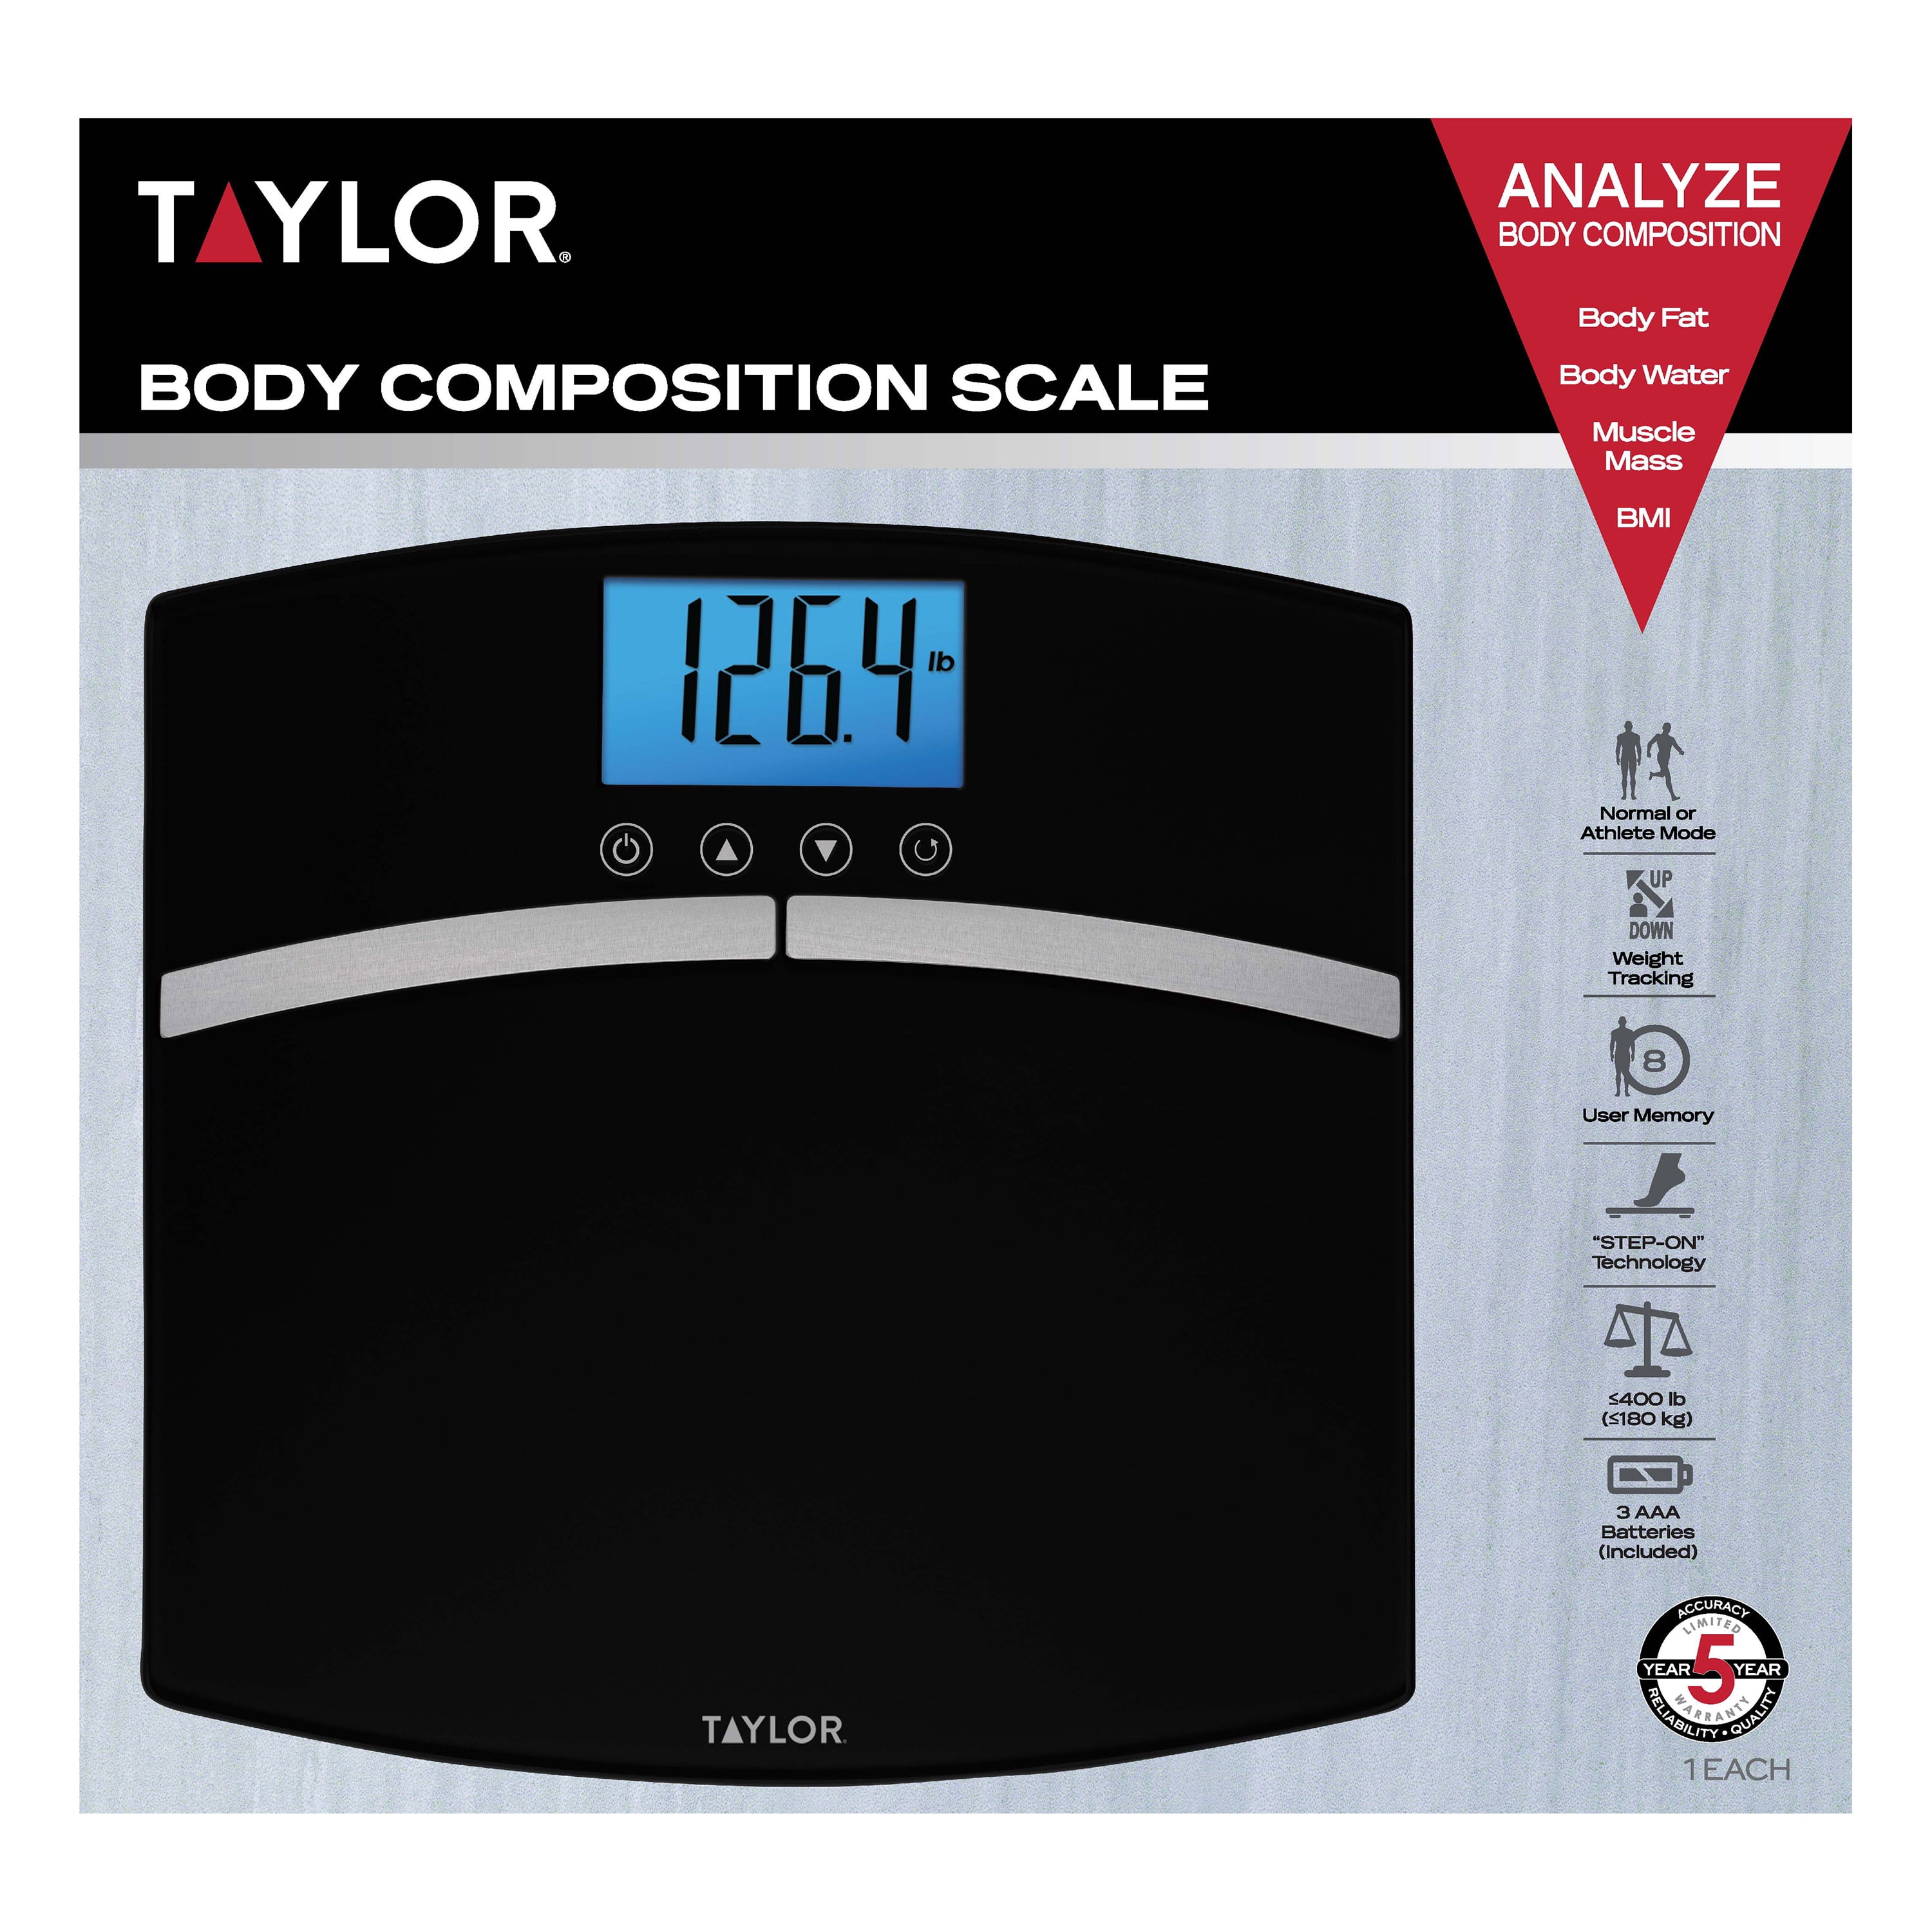 Fat Water BMI Athlete Mode Taylor Body Composition Scale 